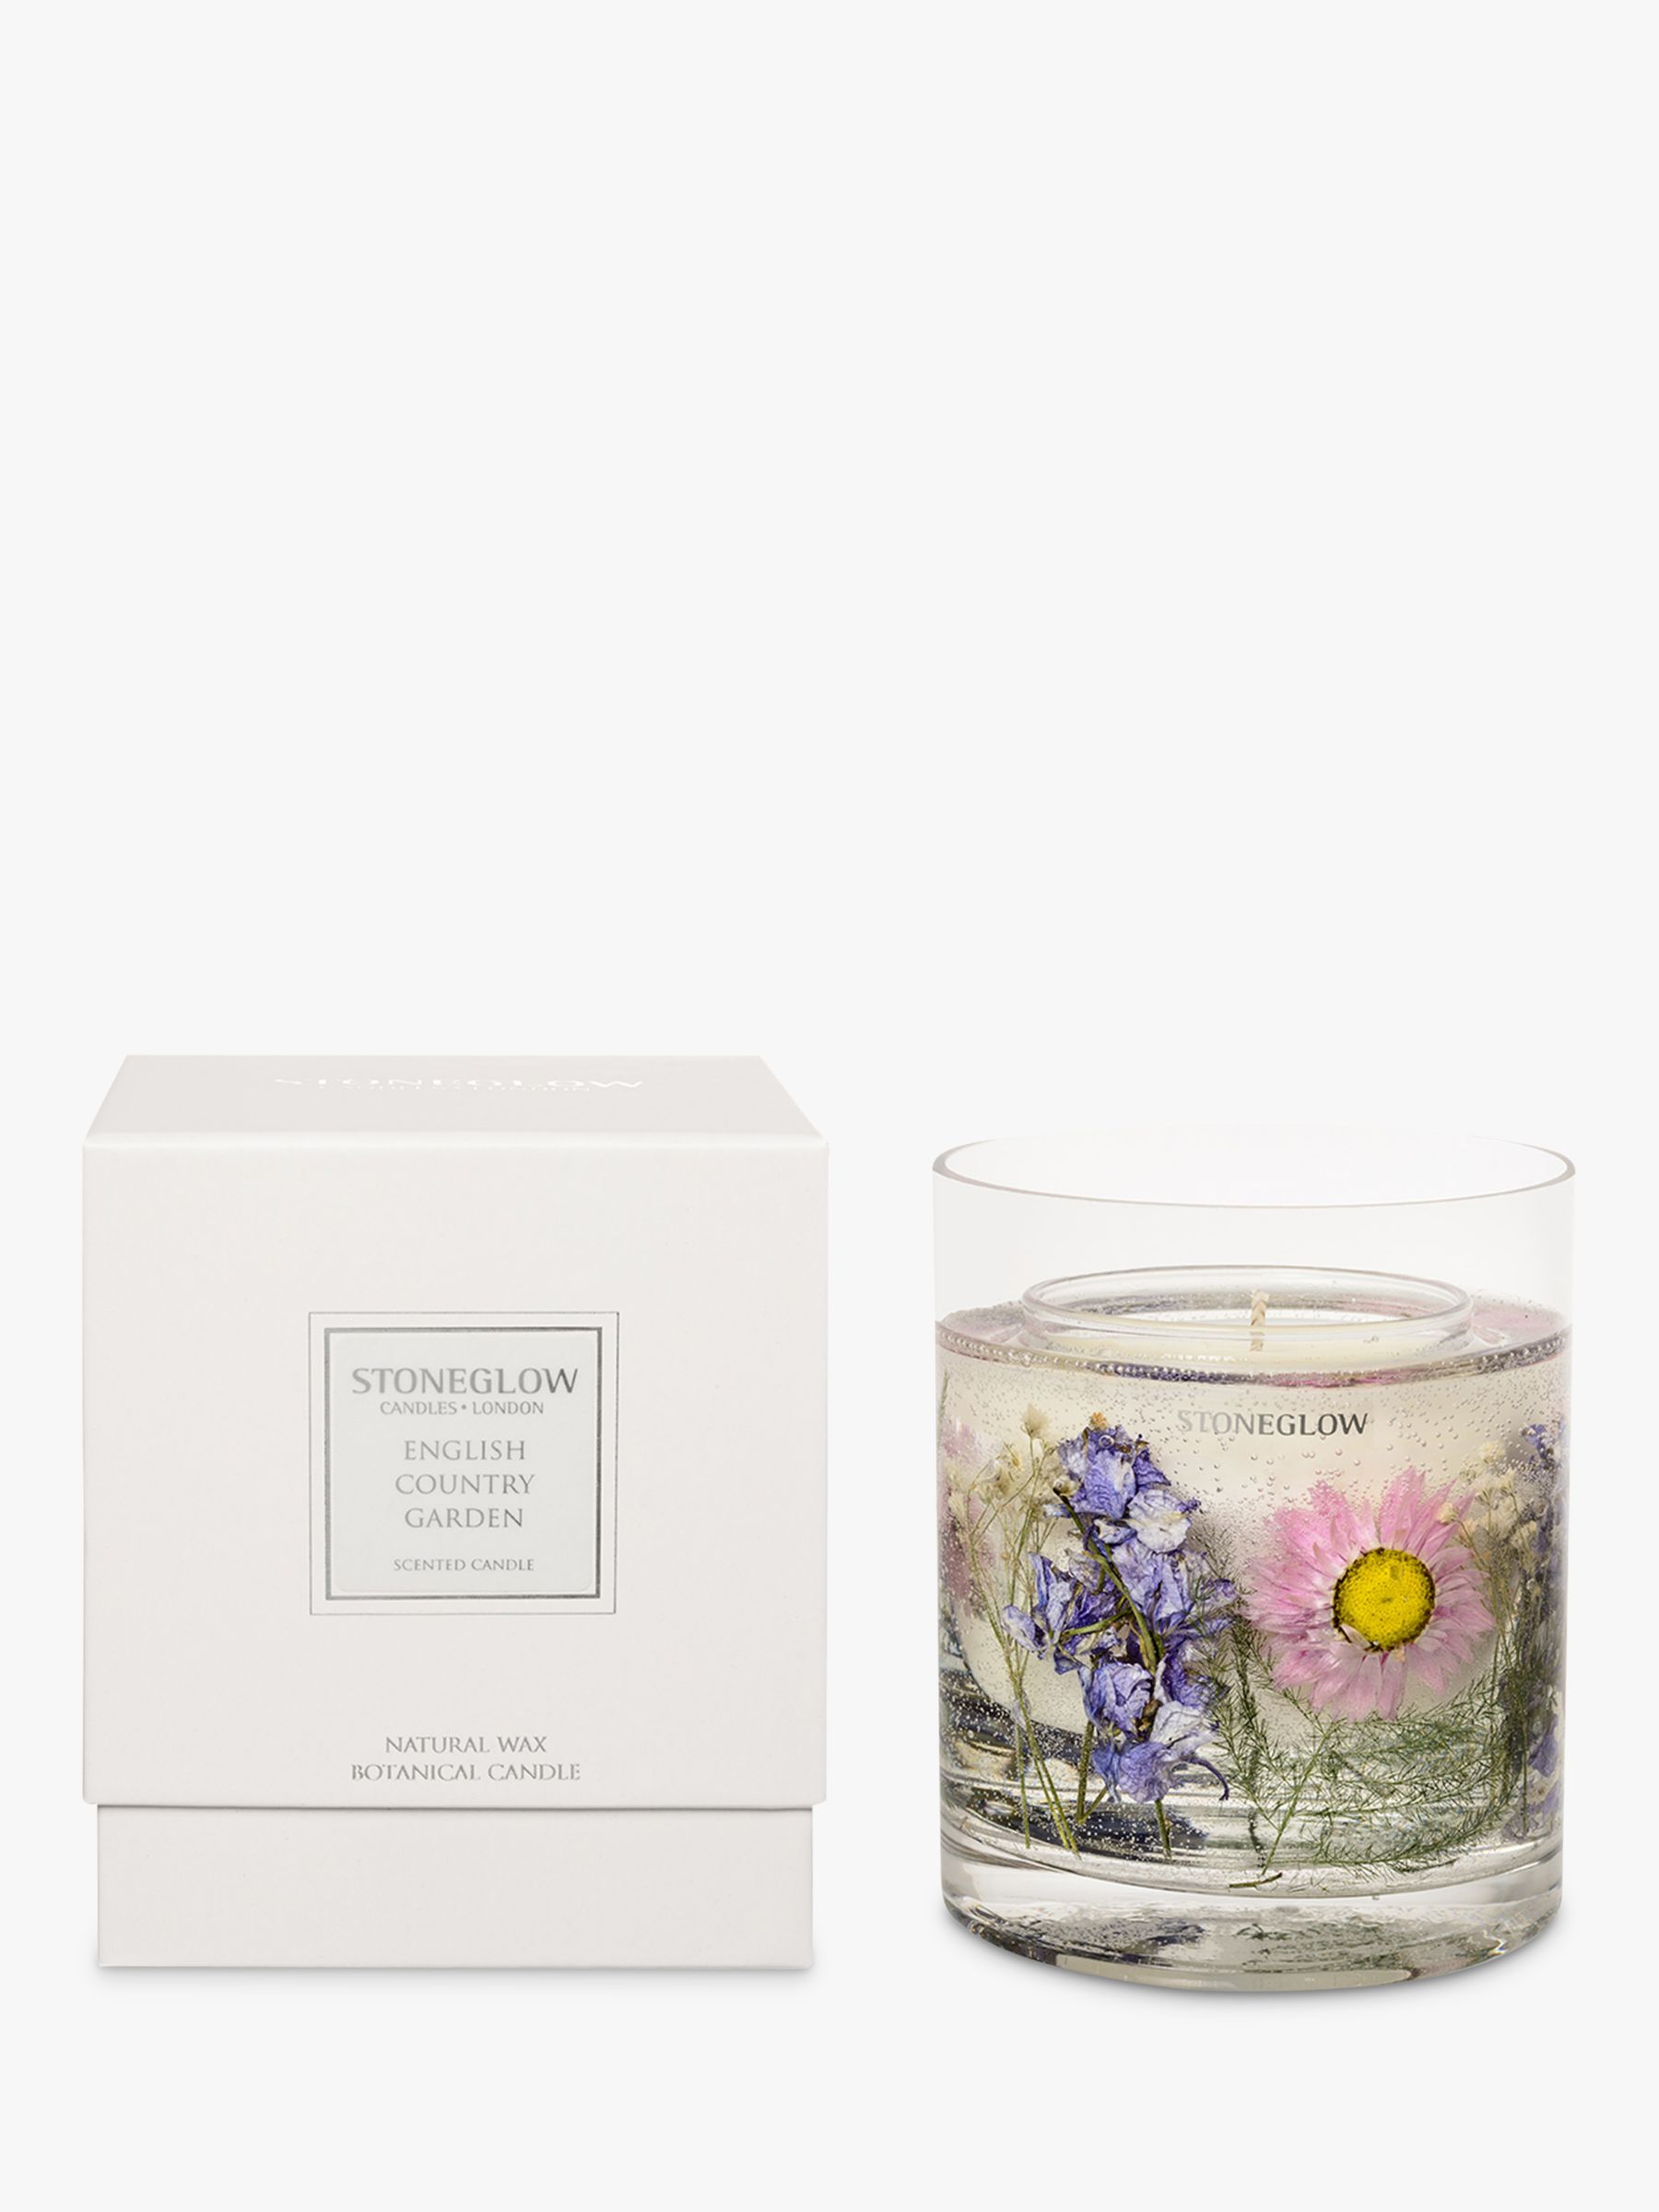 Stoneglow Nature's Gift English Country Garden Scented Gel Candle